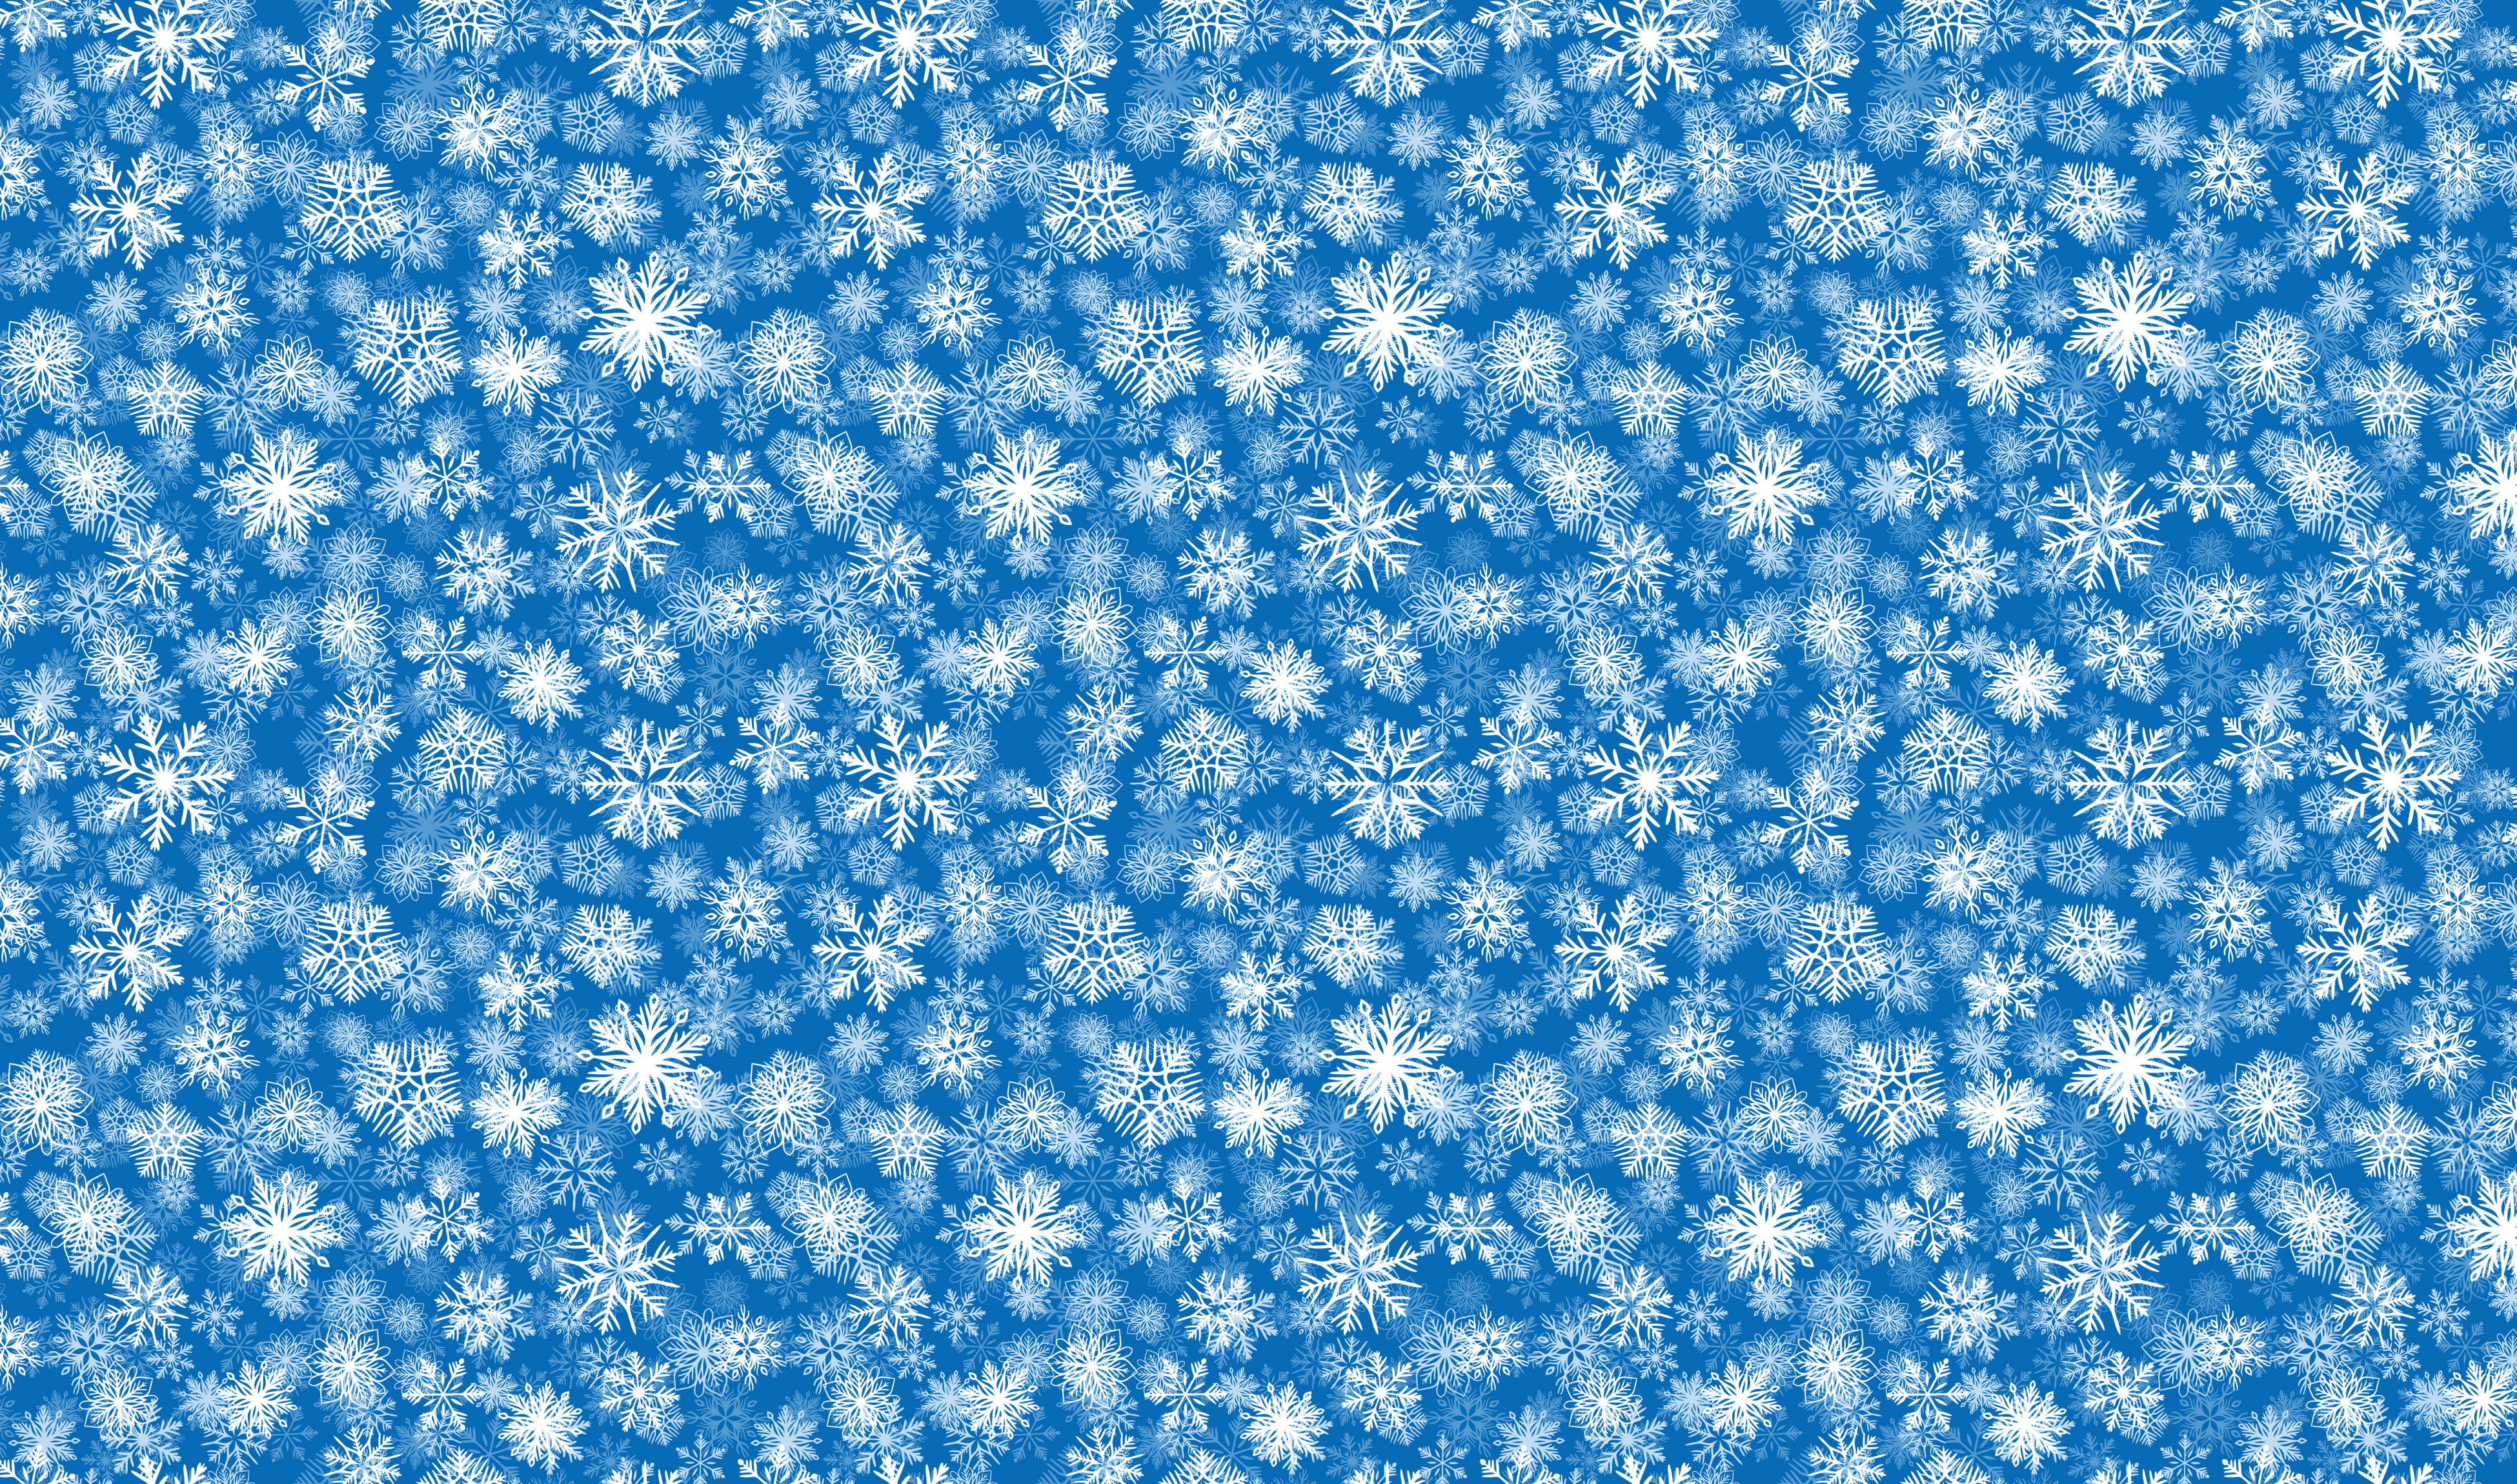 Realistic Snowflake Pattern Heat Transfer Vinyl and Carrier Sheet